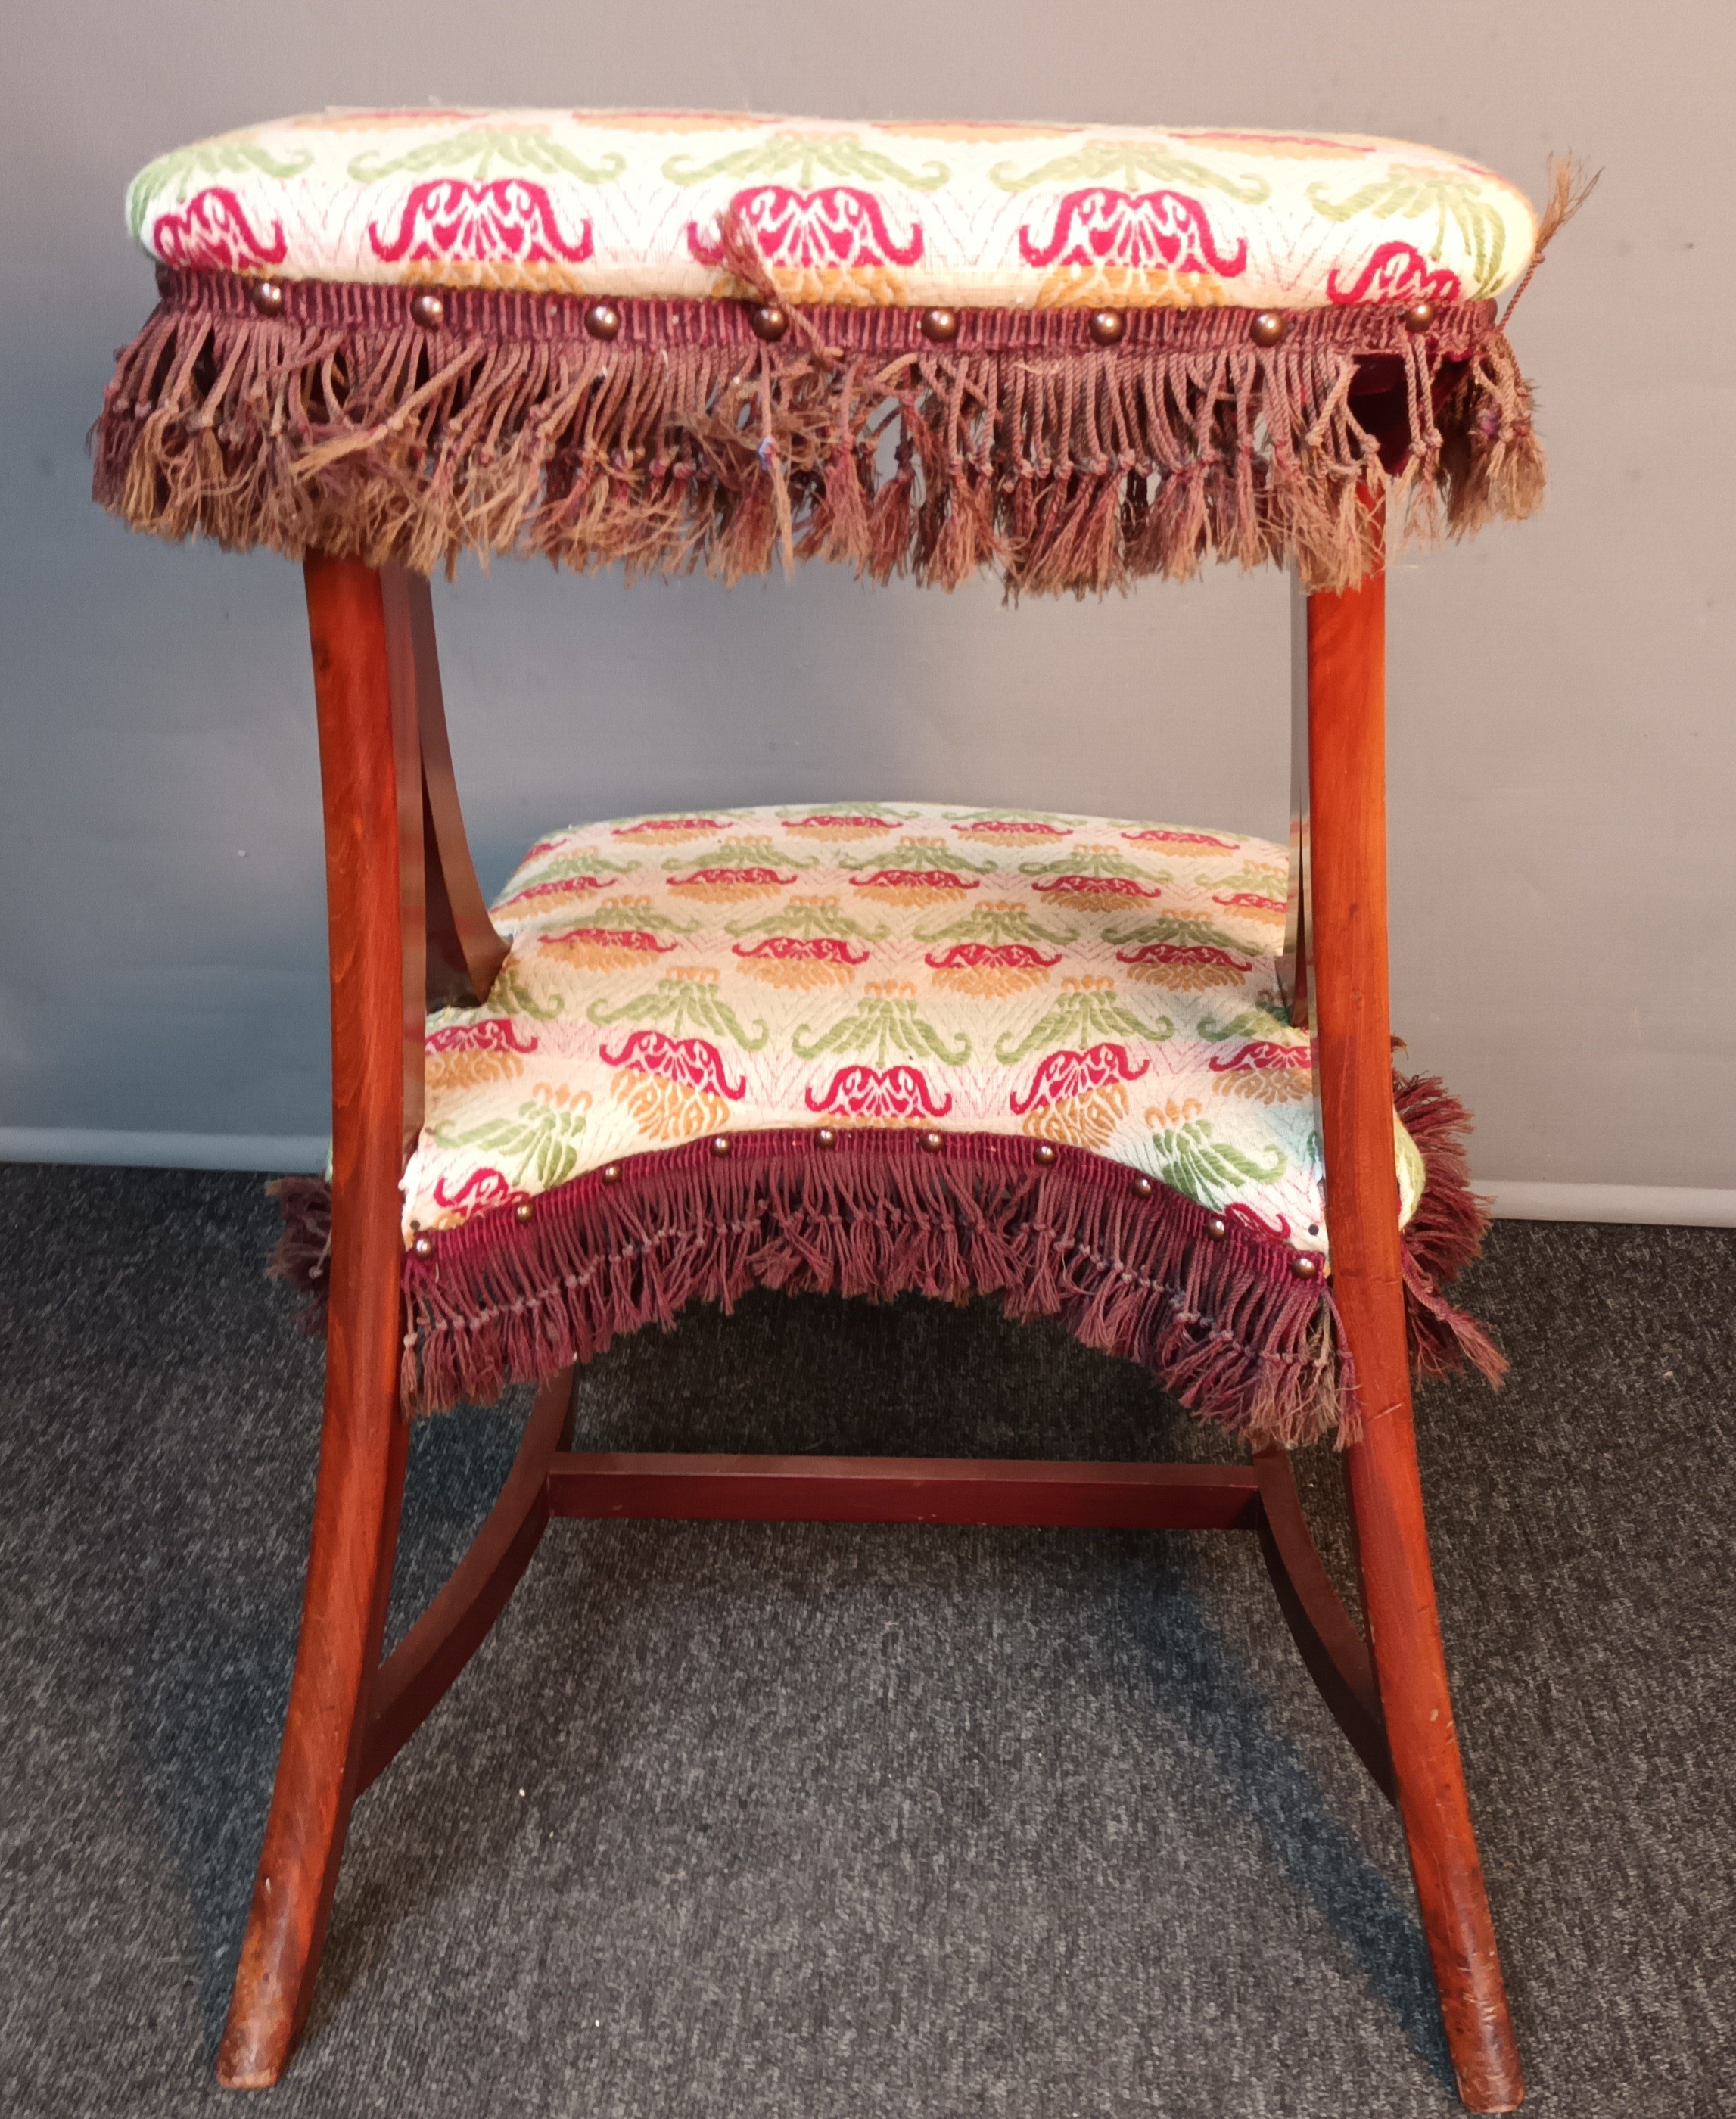 19th century prayer stool/ chair, upholstered in a floral material with brown fringe, raised on - Image 4 of 4